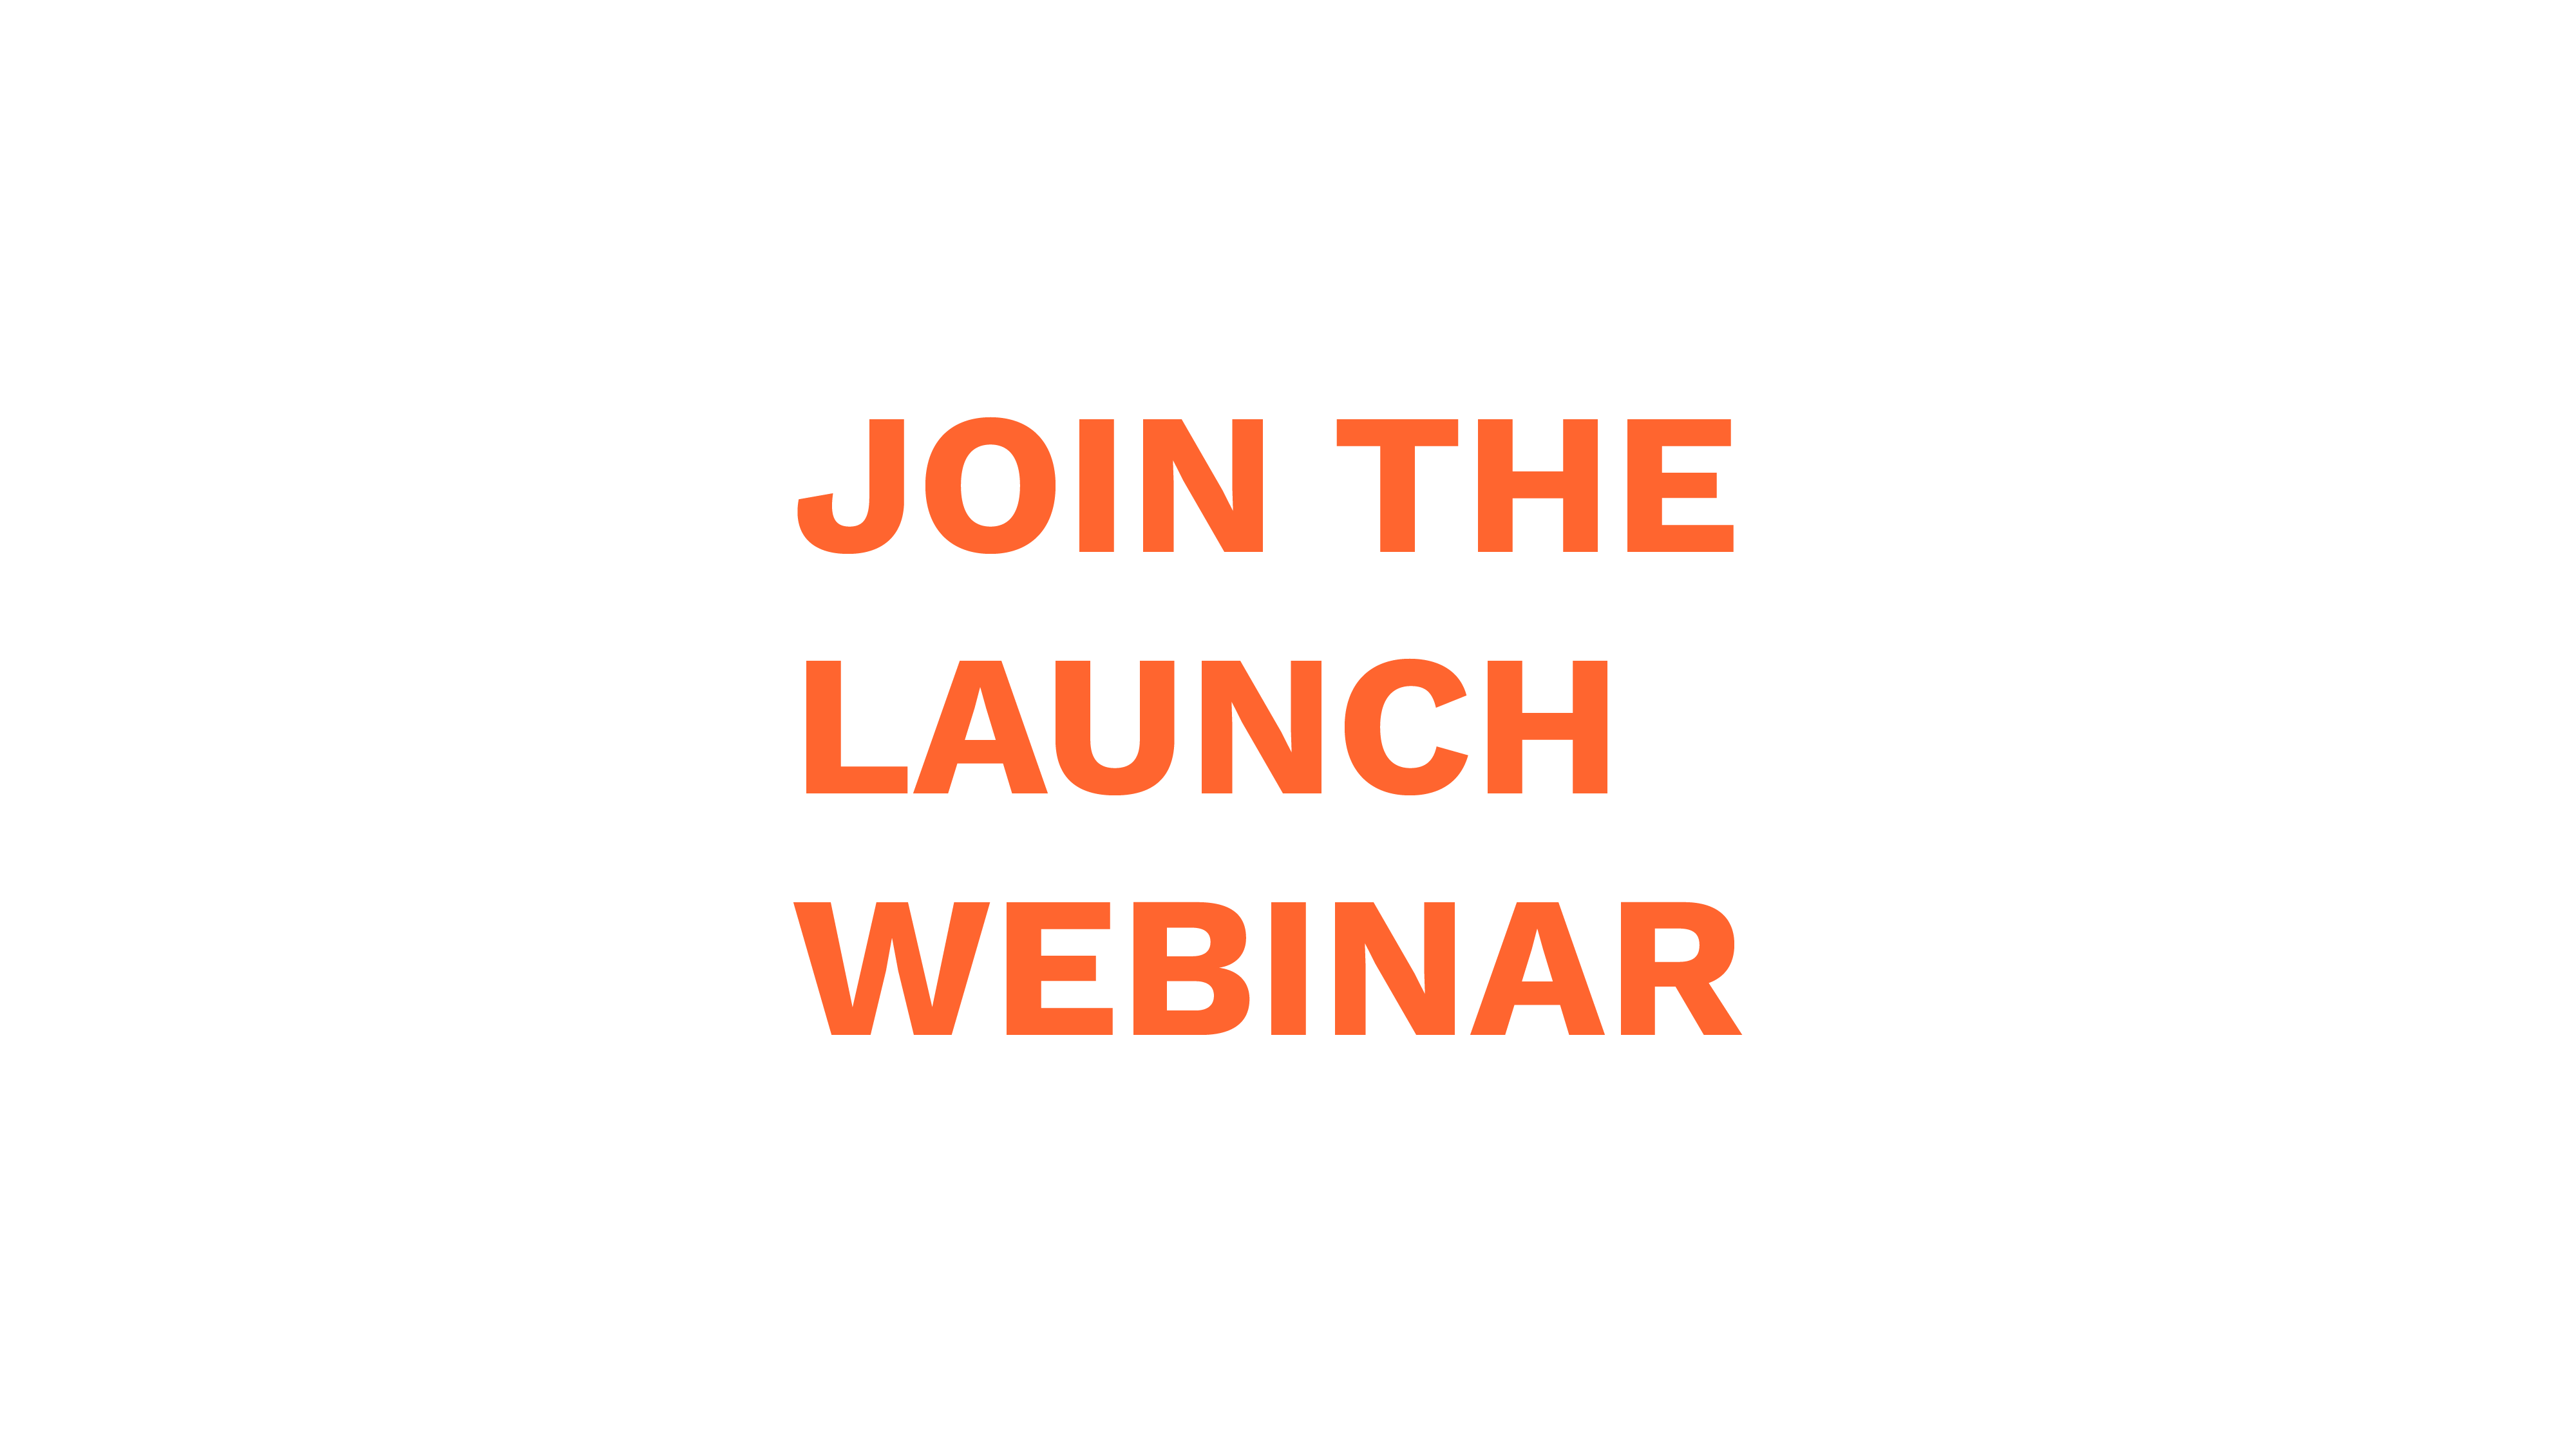 join-the-launch-webinar-01.png